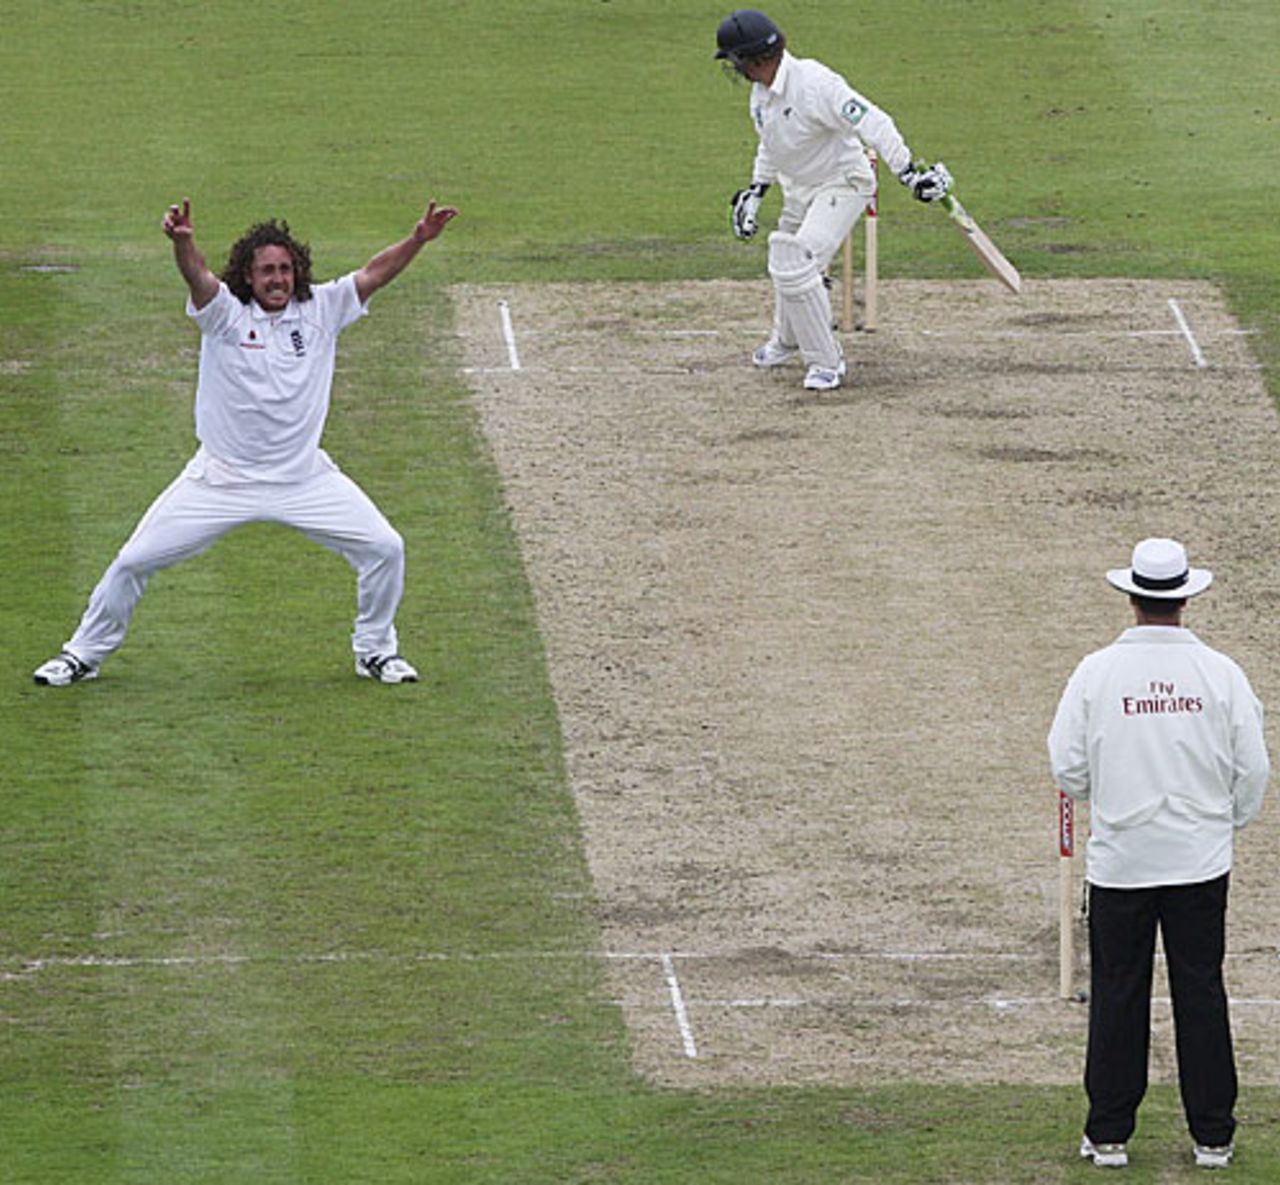 A wide-angle shot of Ryan Sidebottom appealing for James Marshall's wicket, England v New Zealand, 2nd Test, Old Trafford, May 23, 2008